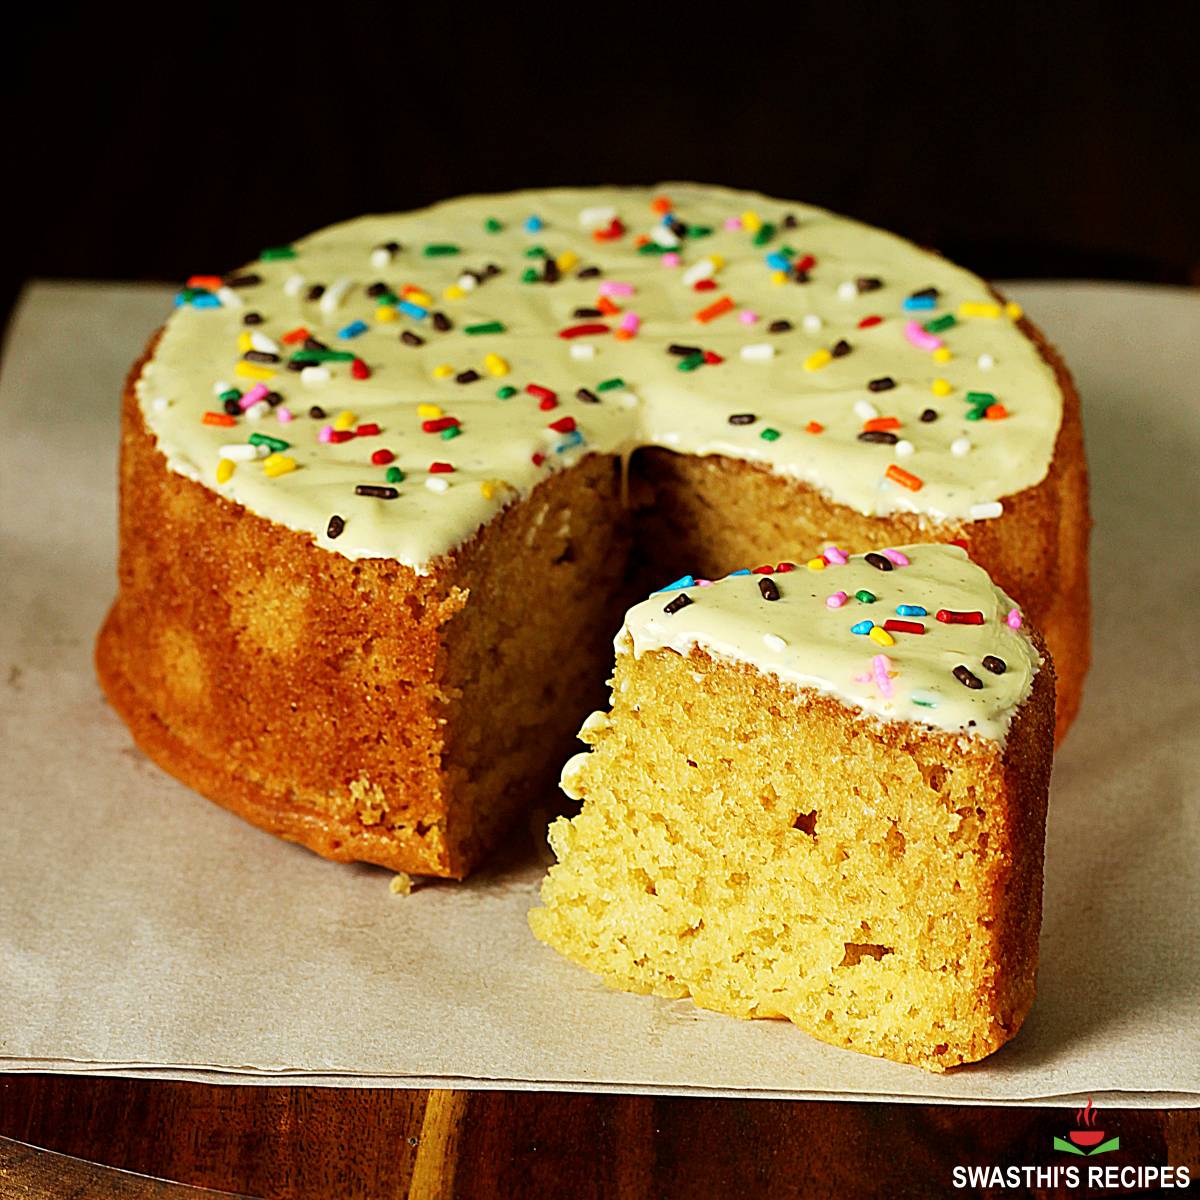 How to Bake a Simple Cake for Beginners Without Oven: A Step-by-Step Guide